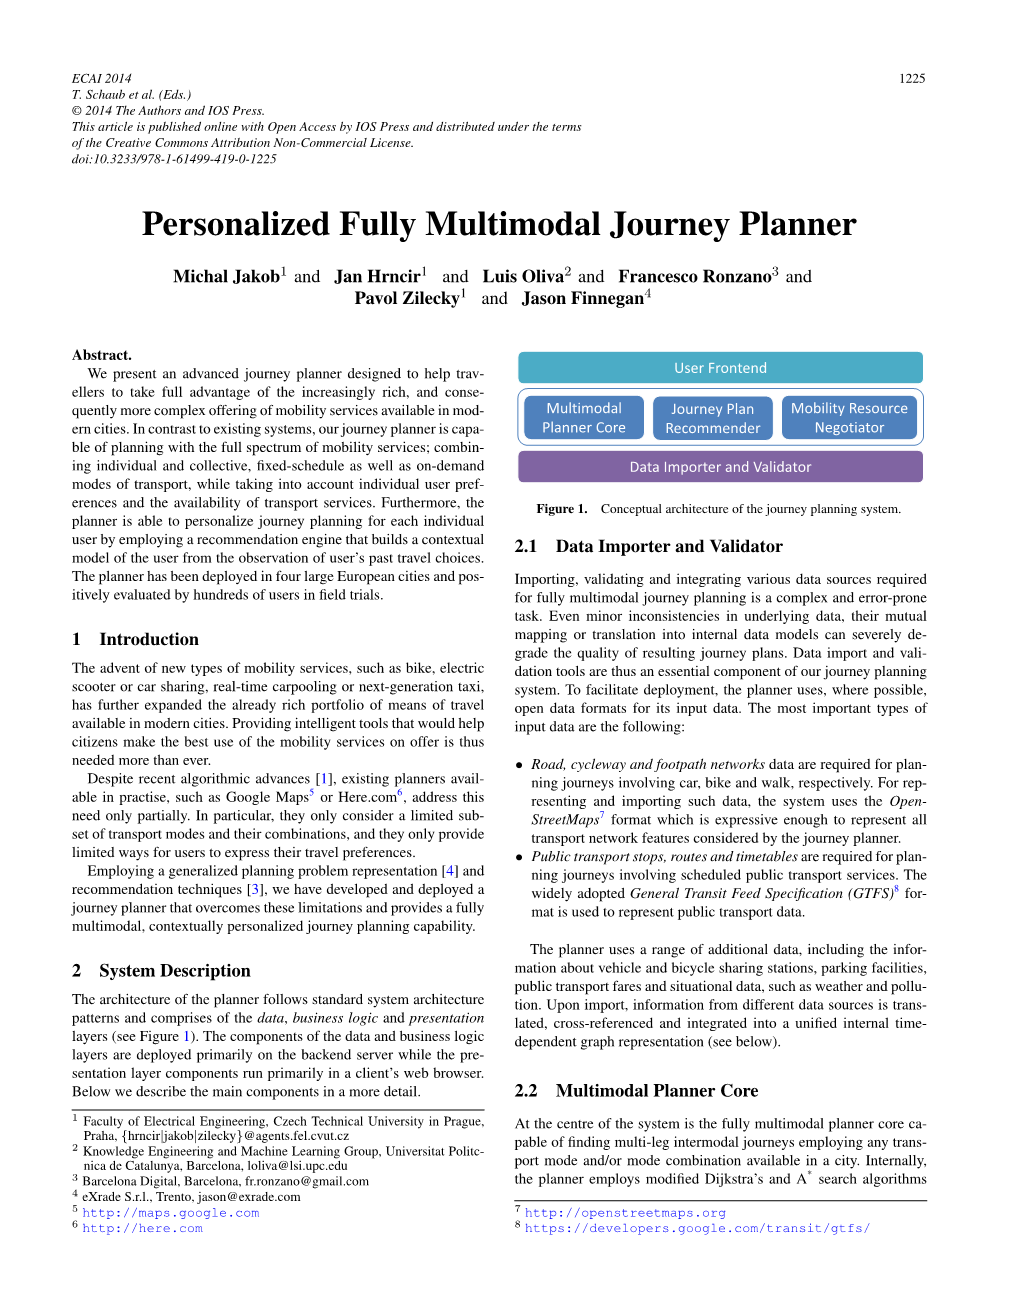 Personalized Fully Multimodal Journey Planner